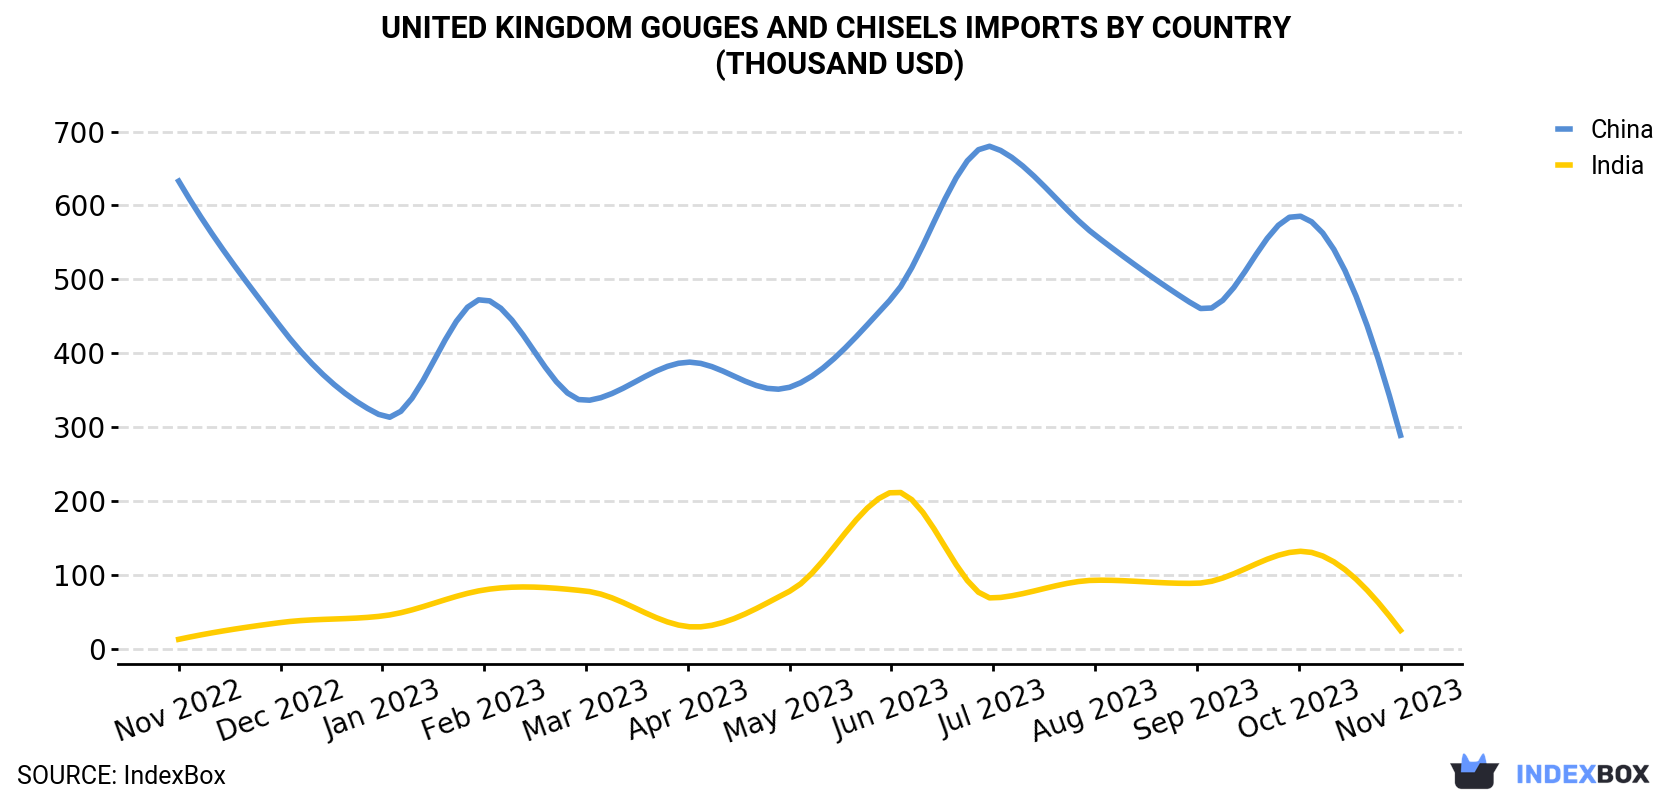 United Kingdom Gouges And Chisels Imports By Country (Thousand USD)